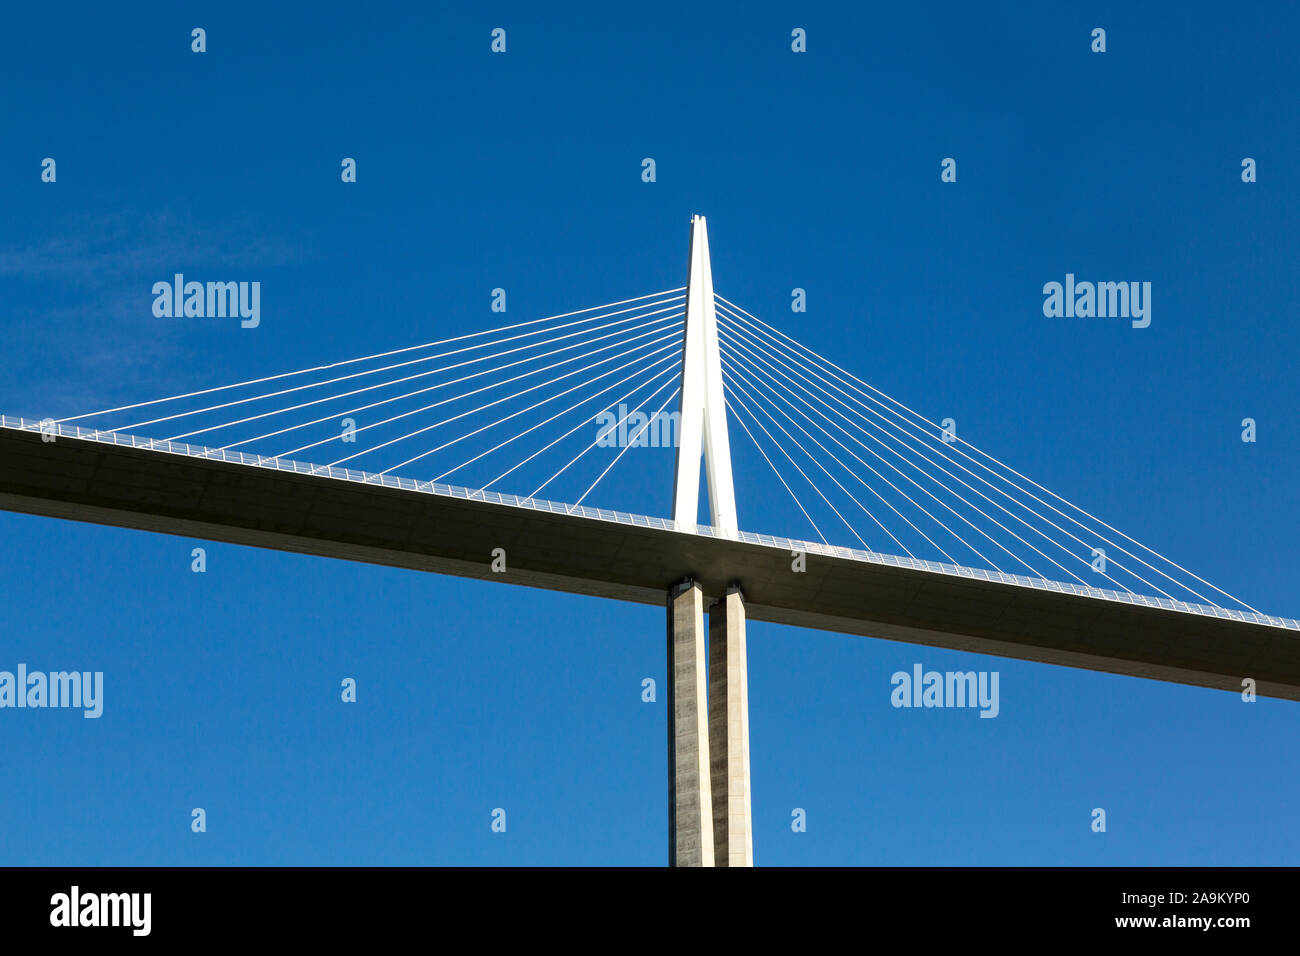 One pylon of the Millau viaduct against a blue sky, photographed from below Stock Photo